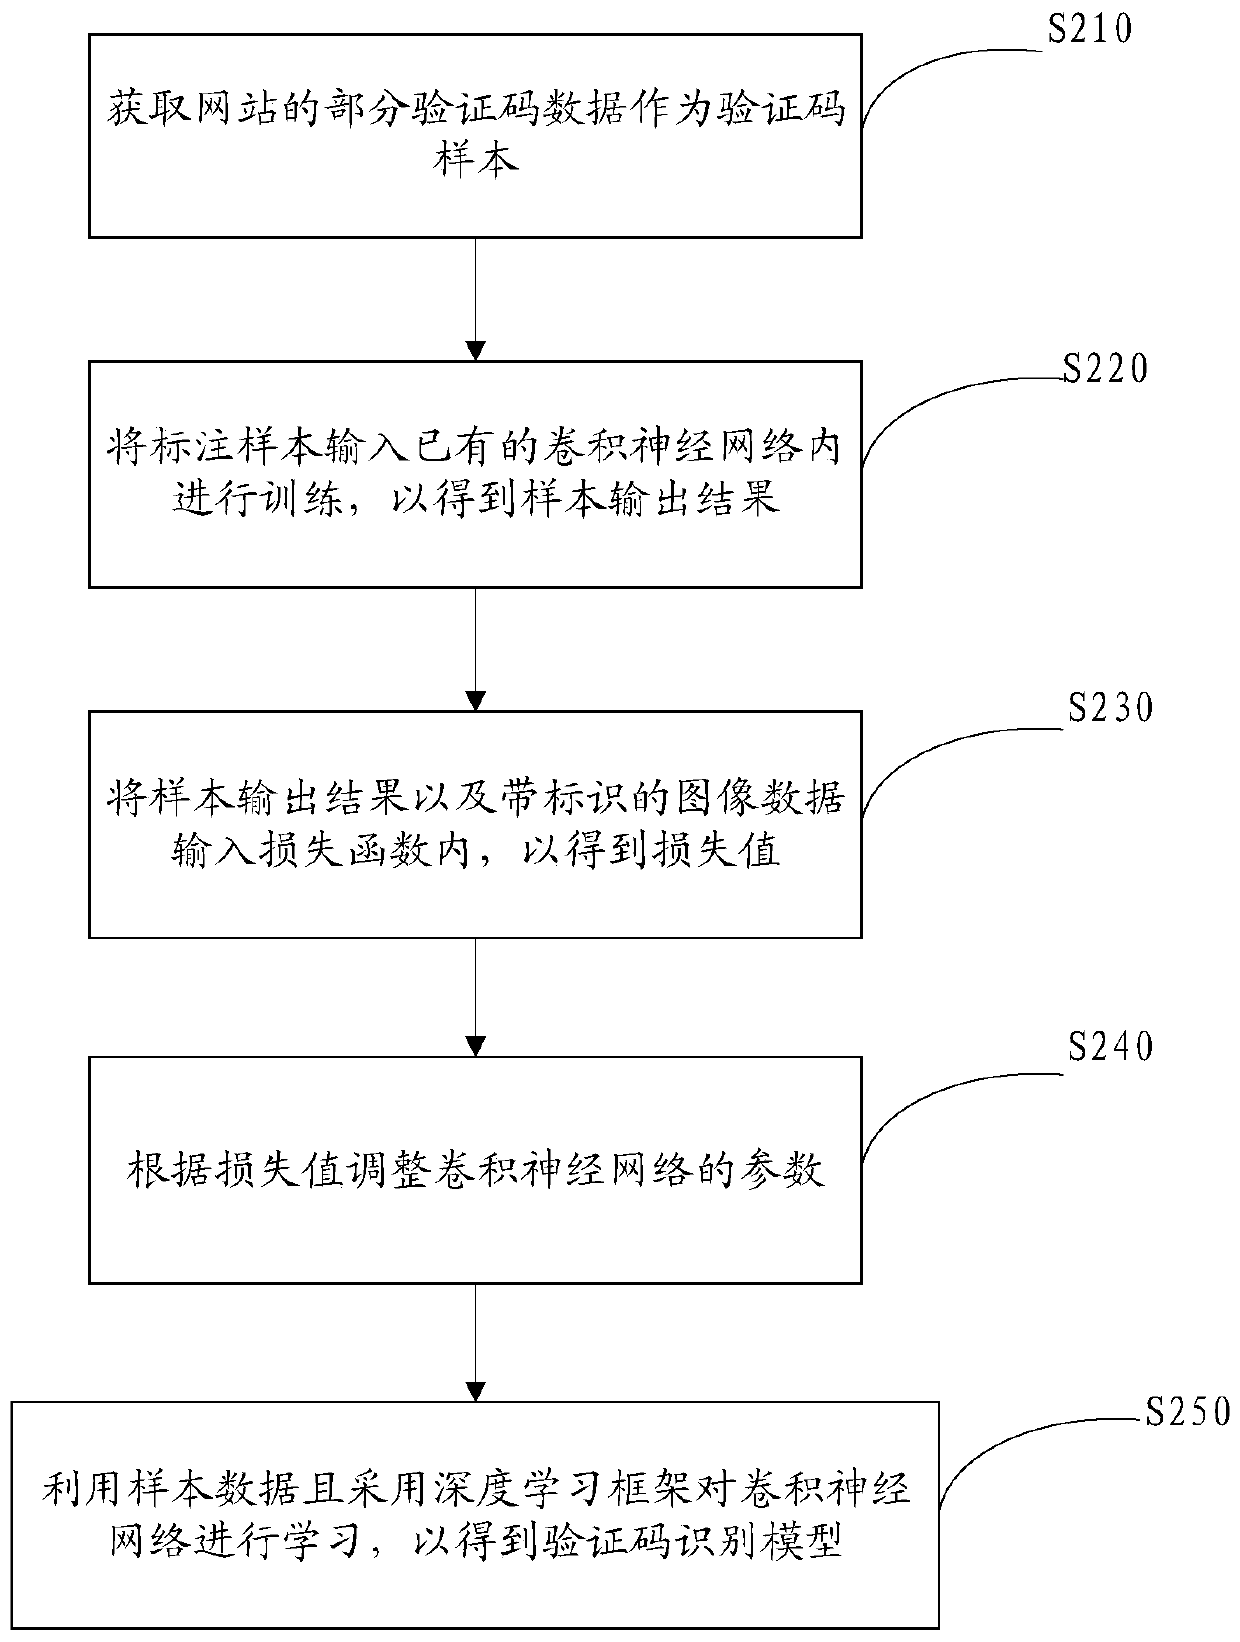 Network verification code recognition method and device based on deep learning and computer equipment